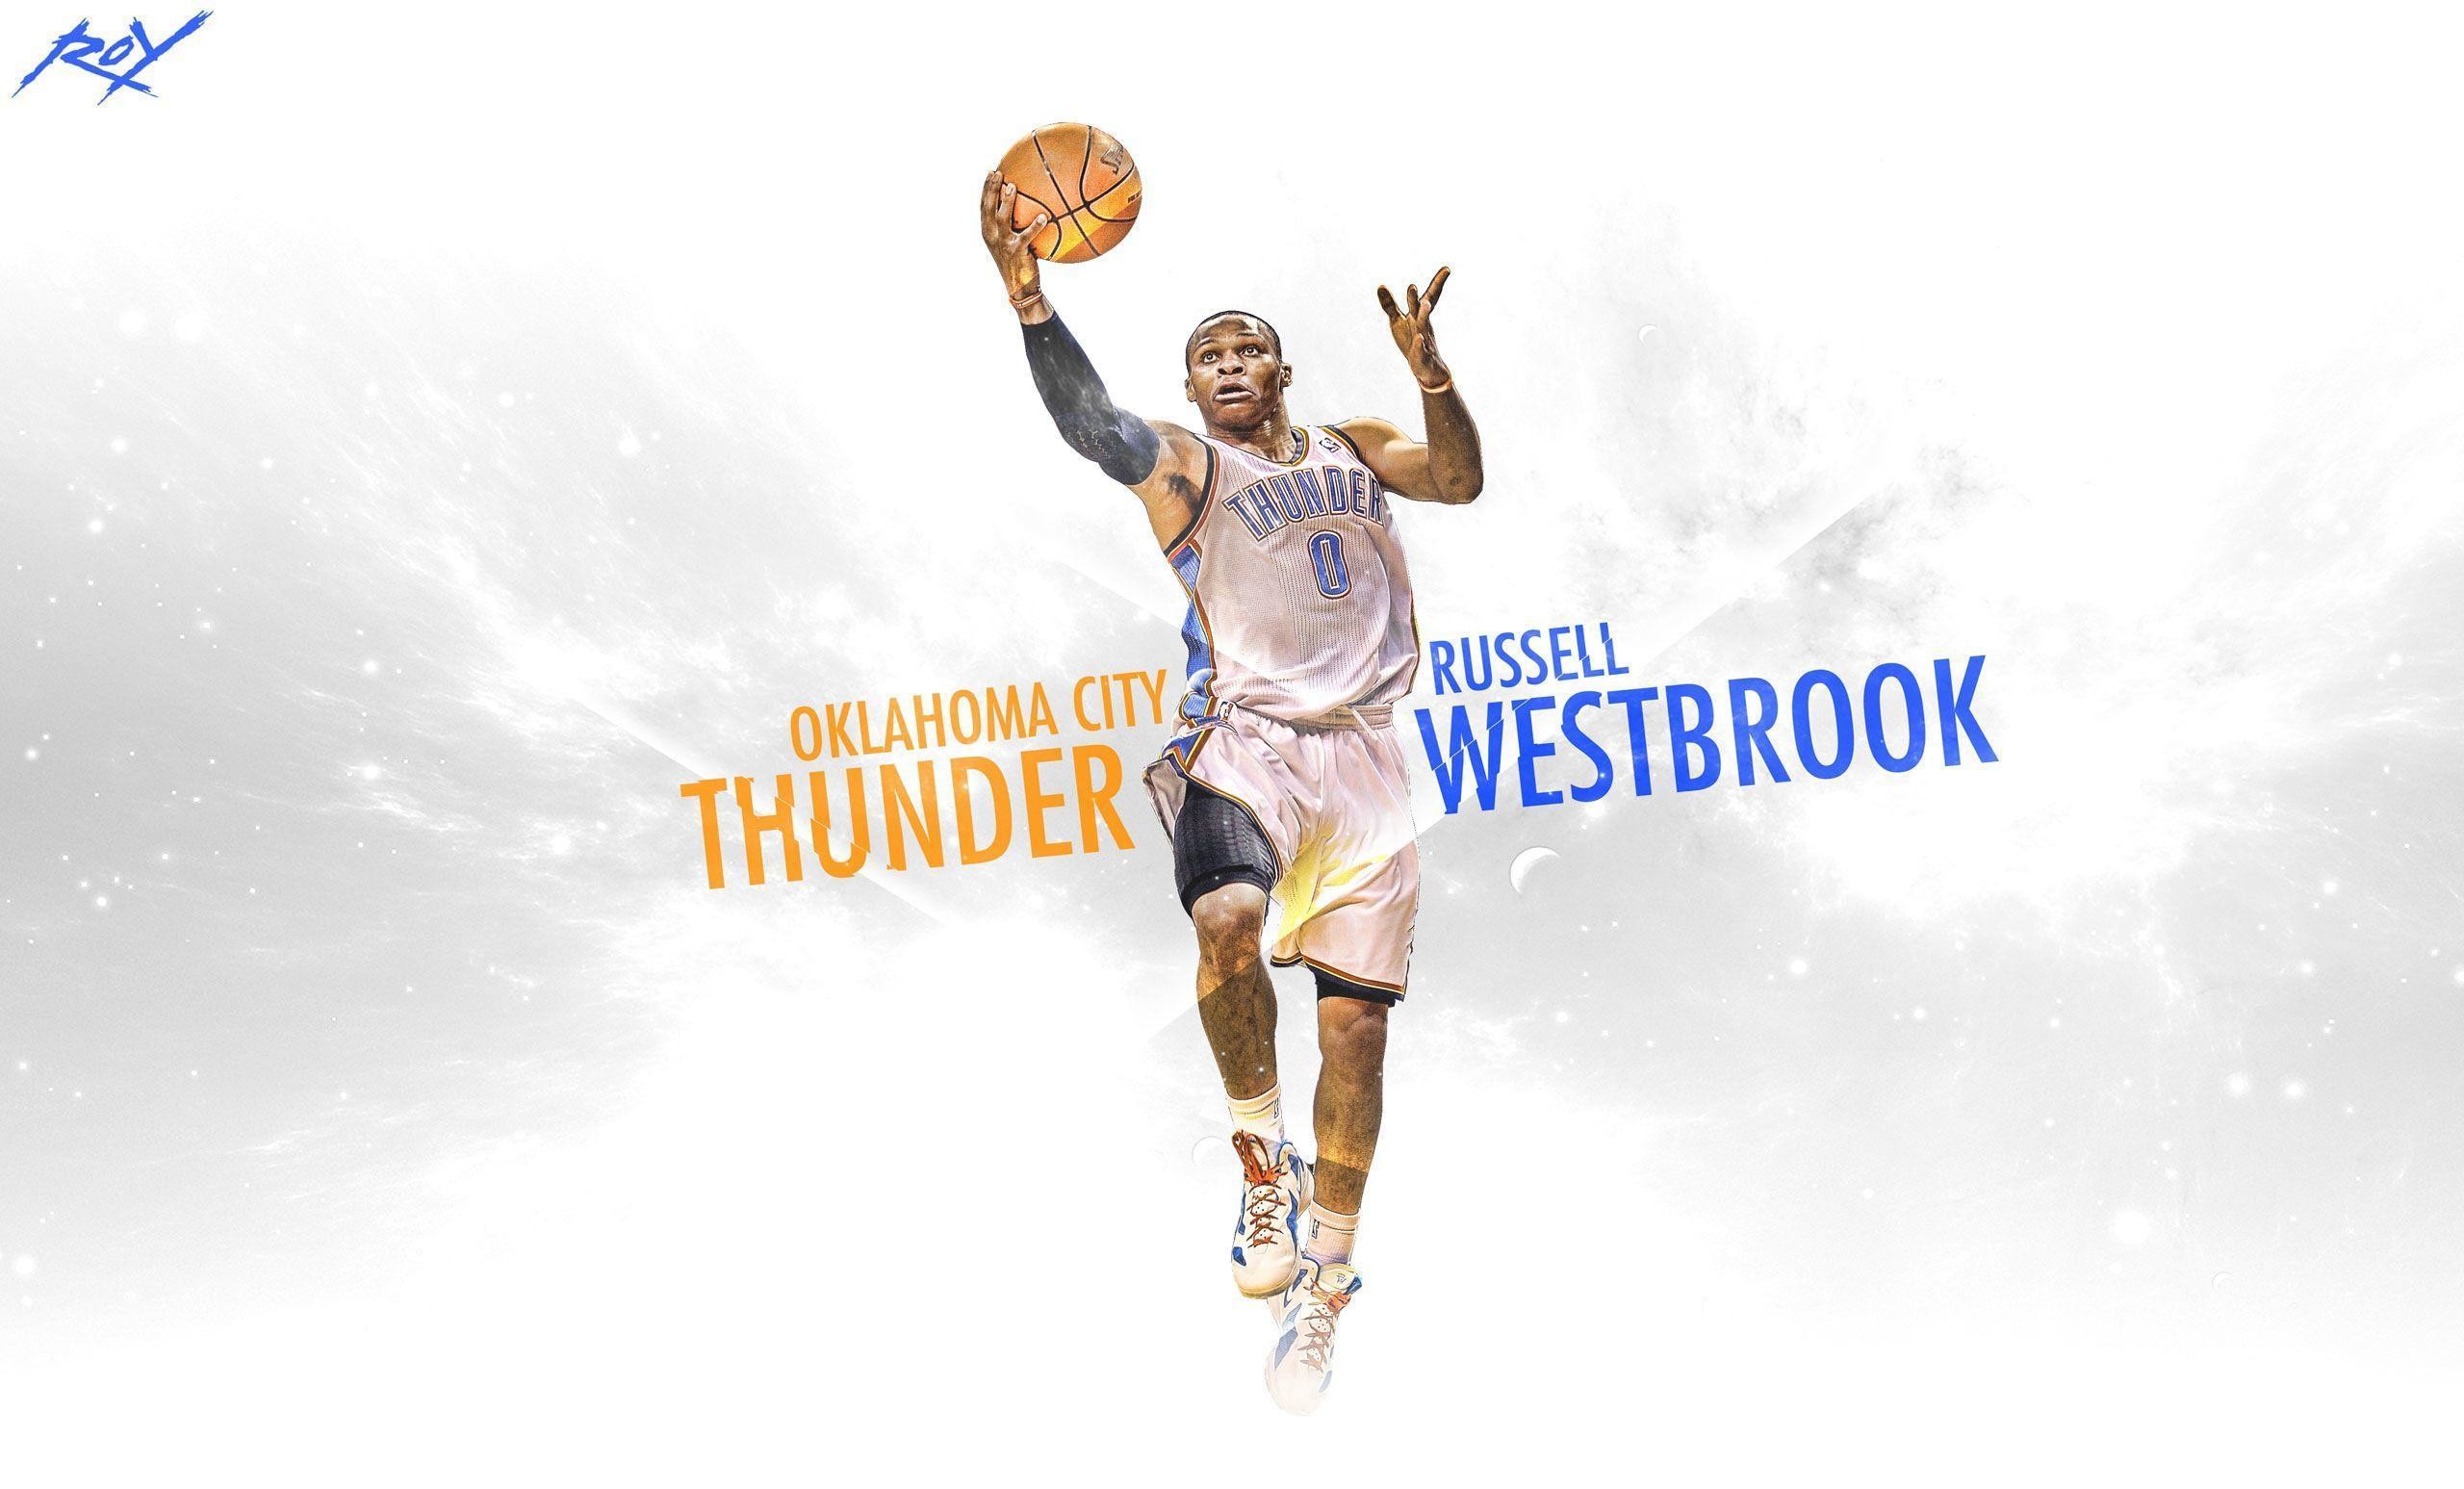 Russell Westbrook Wallpaper HD | HD Wallpapers, Backgrounds .